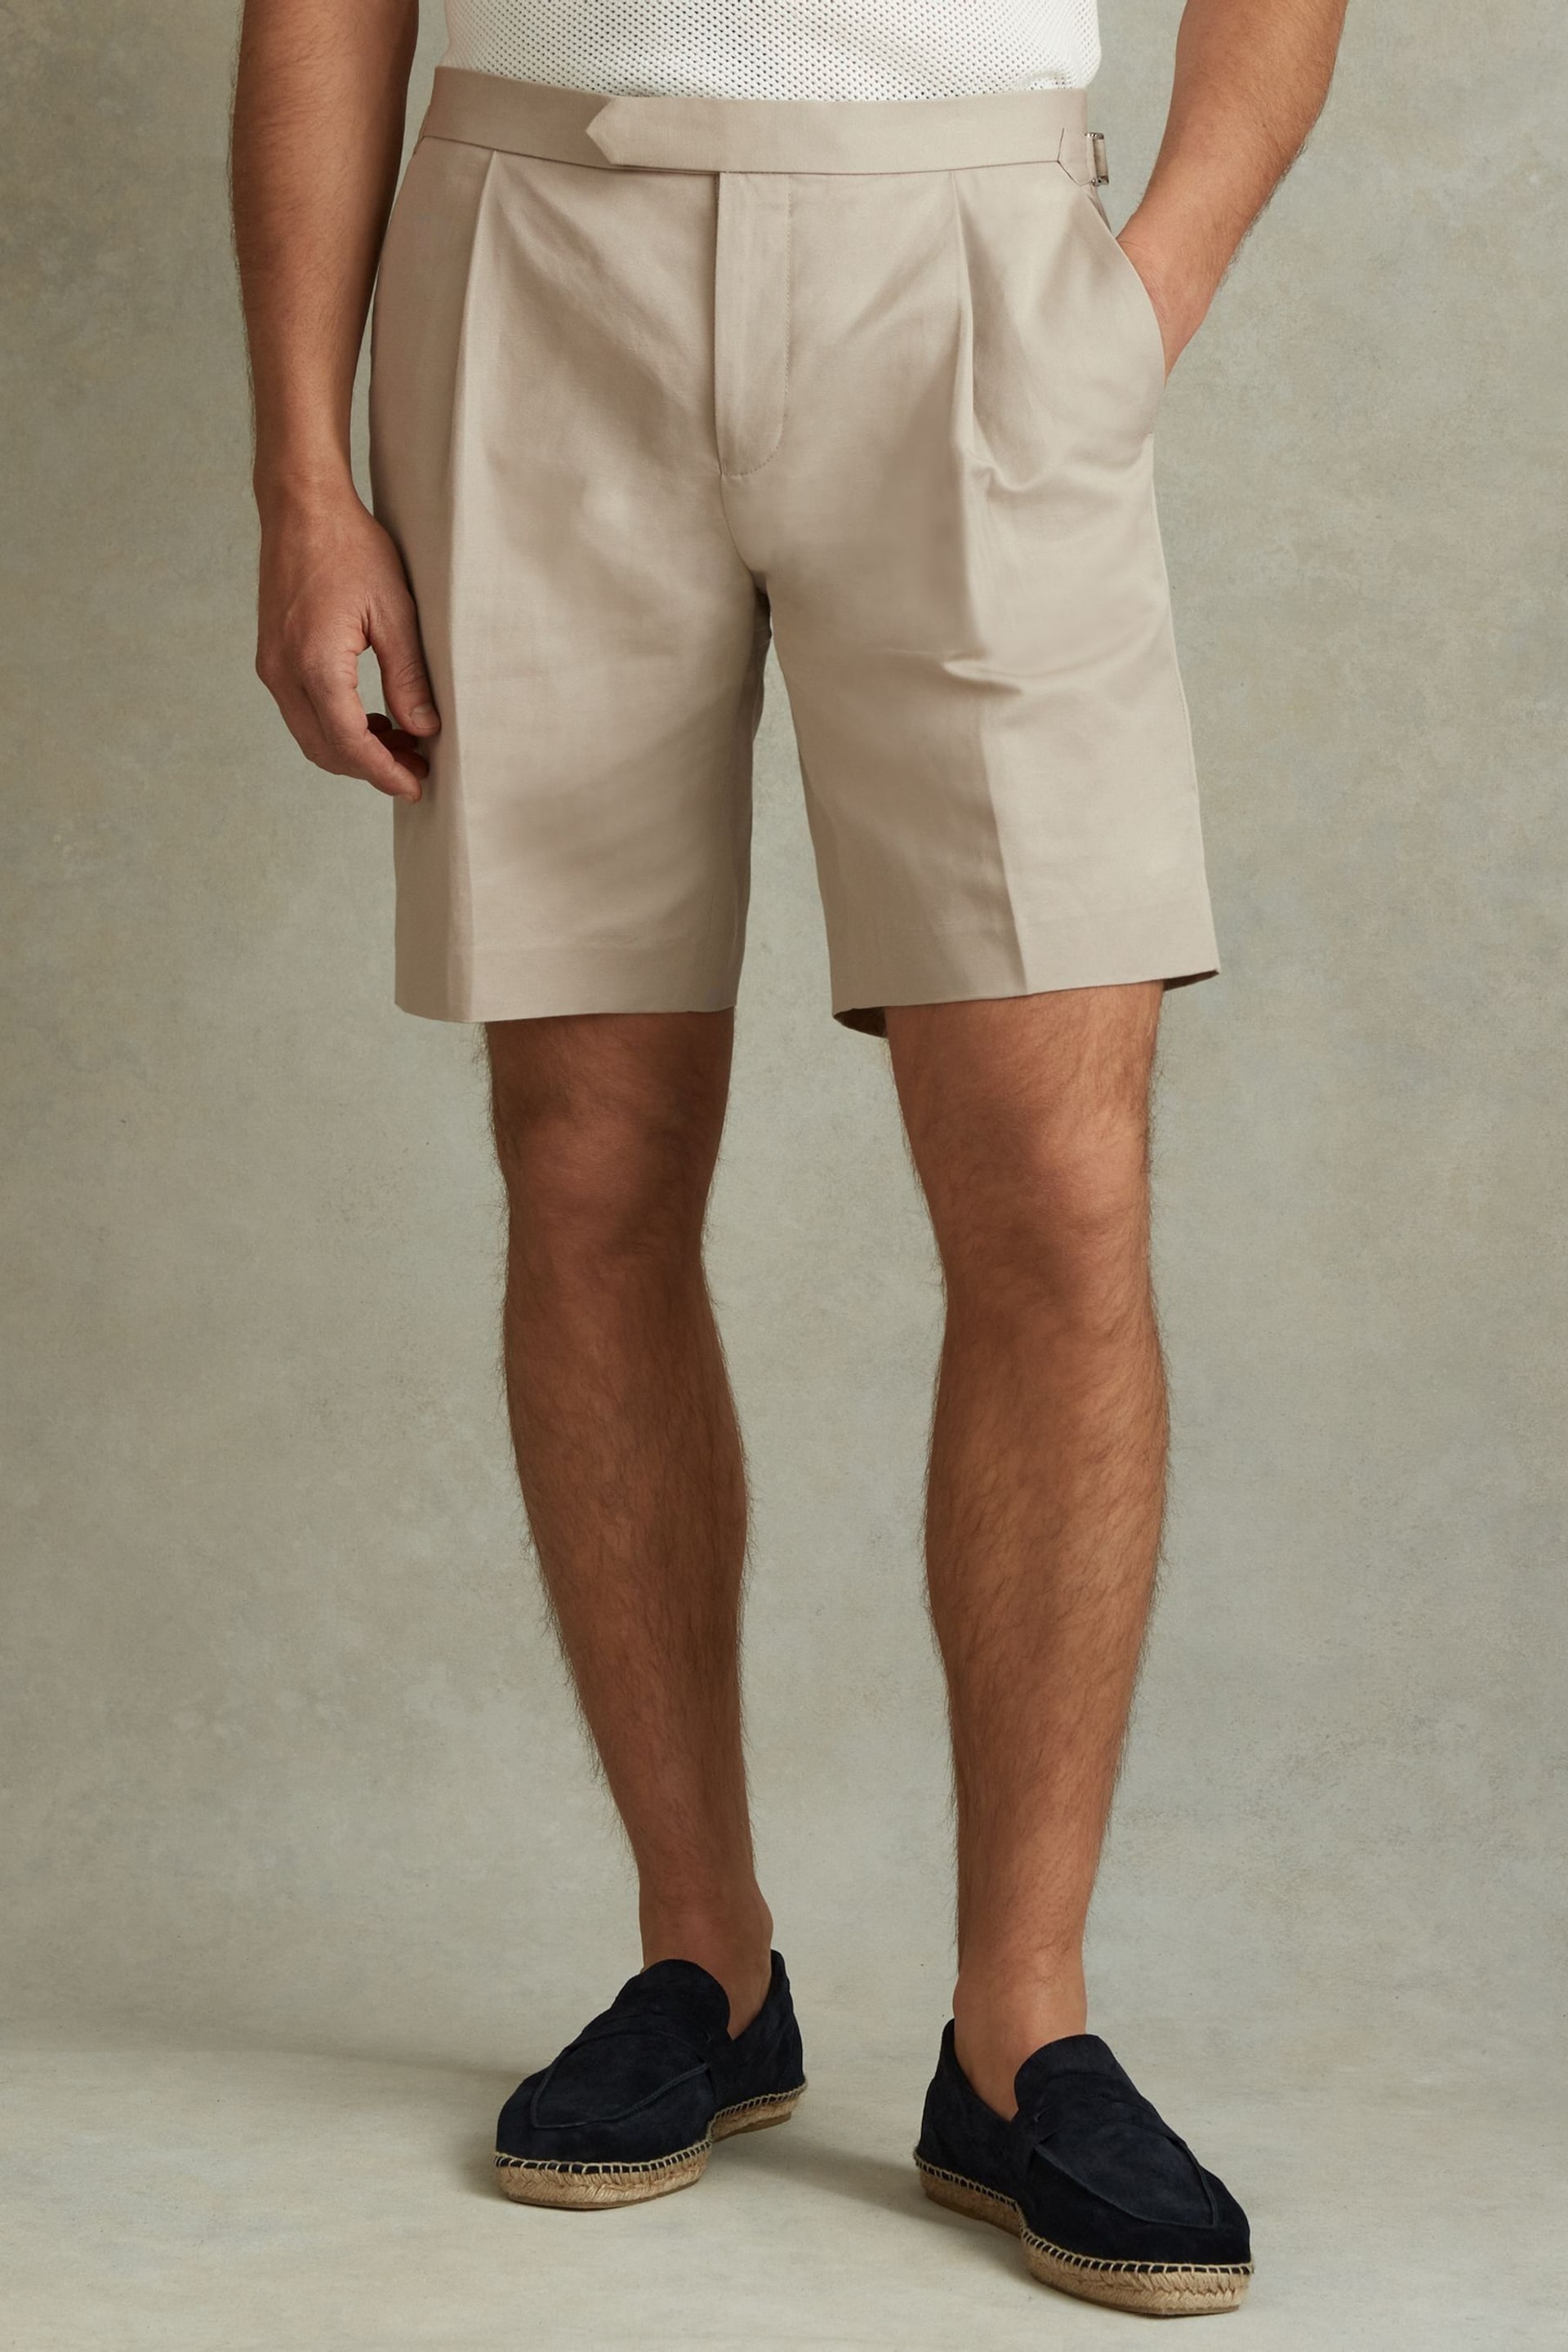 Reiss Stone Con Cotton Blend Adjuster Shorts - Image 3 of 5